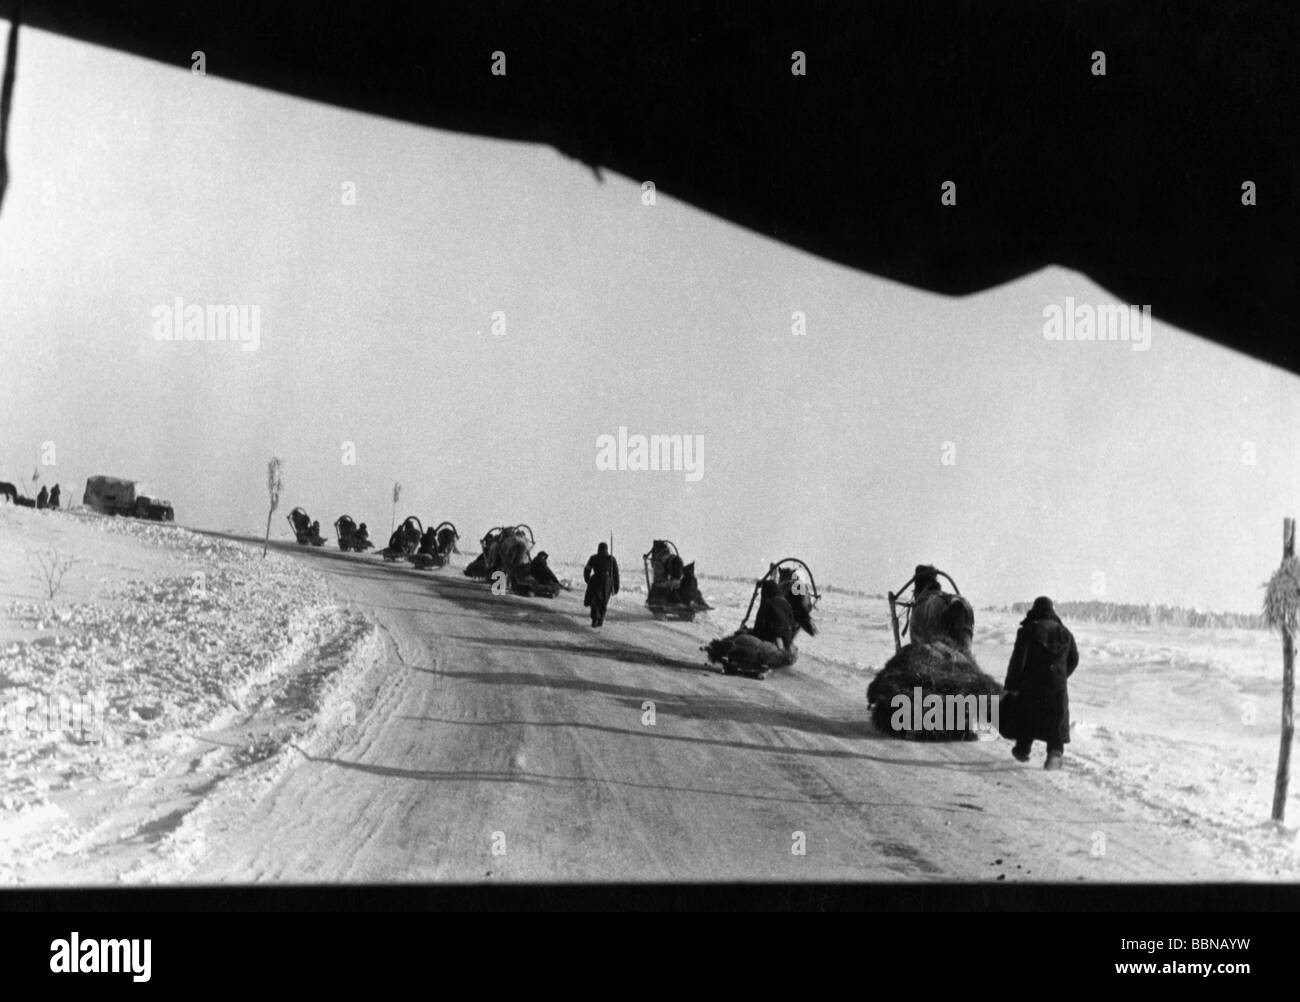 events, Second World War / WWII, Russia 1942 / 1943, German supply column with sleighs on the Eastern Front, circa 1942, Wehrmacht, USSR, Soviet Union, Third Reich, military, snow, winter, cold, coldness, frost, 20th century, historic, historical, soldiers, horses, sleigh, lorry, people, 1940s, Stock Photo